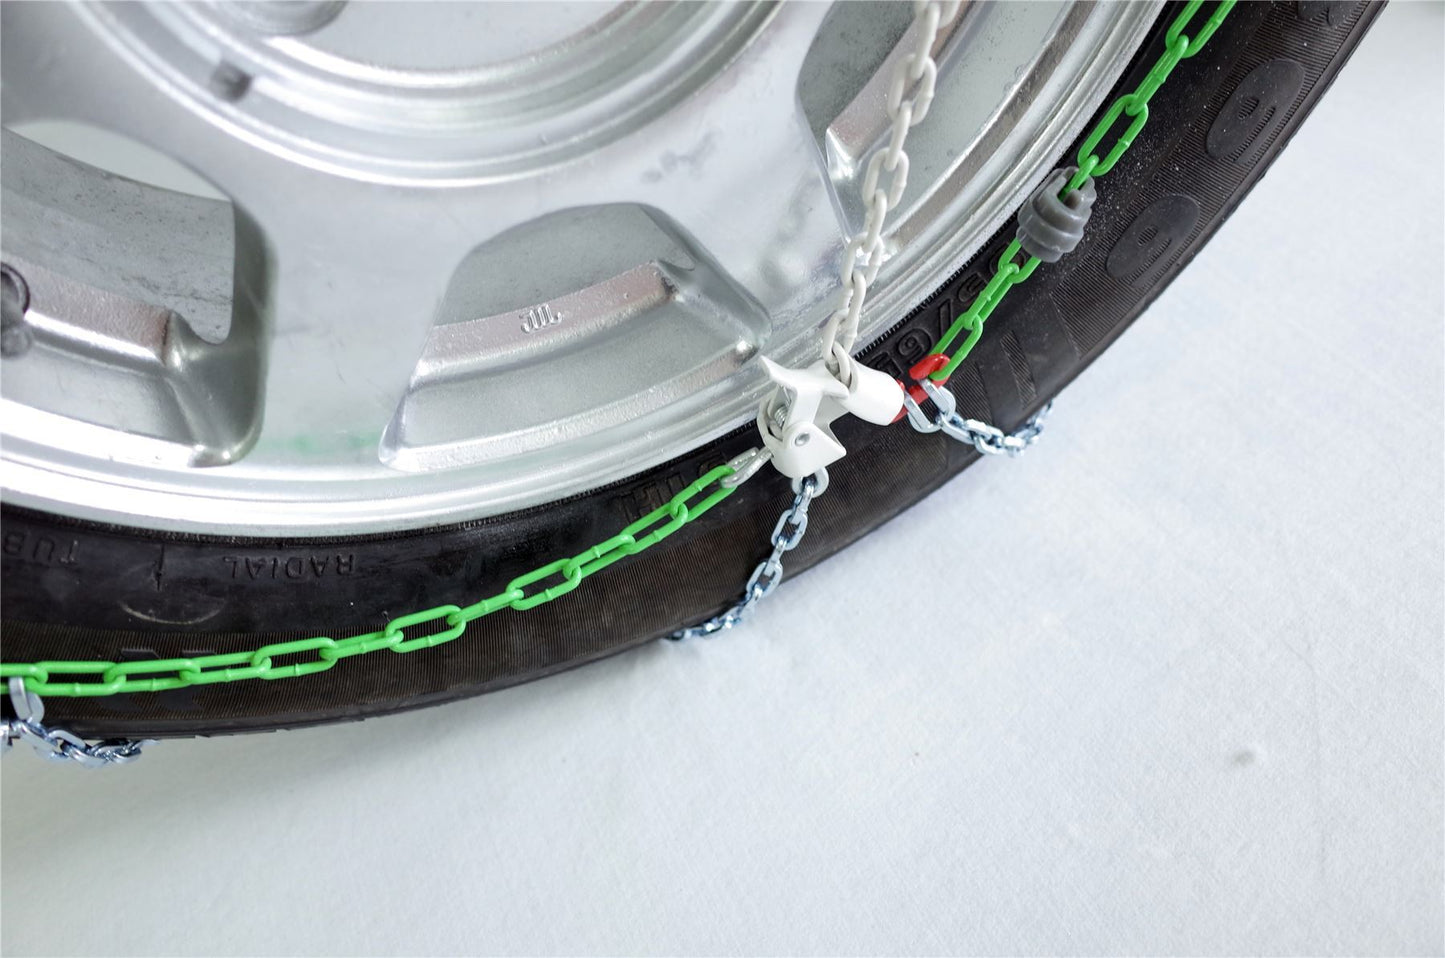 Green Valley TXR9 Winter 9mm Snow Chains - Car Tyre for 16" Wheels 235/60-16